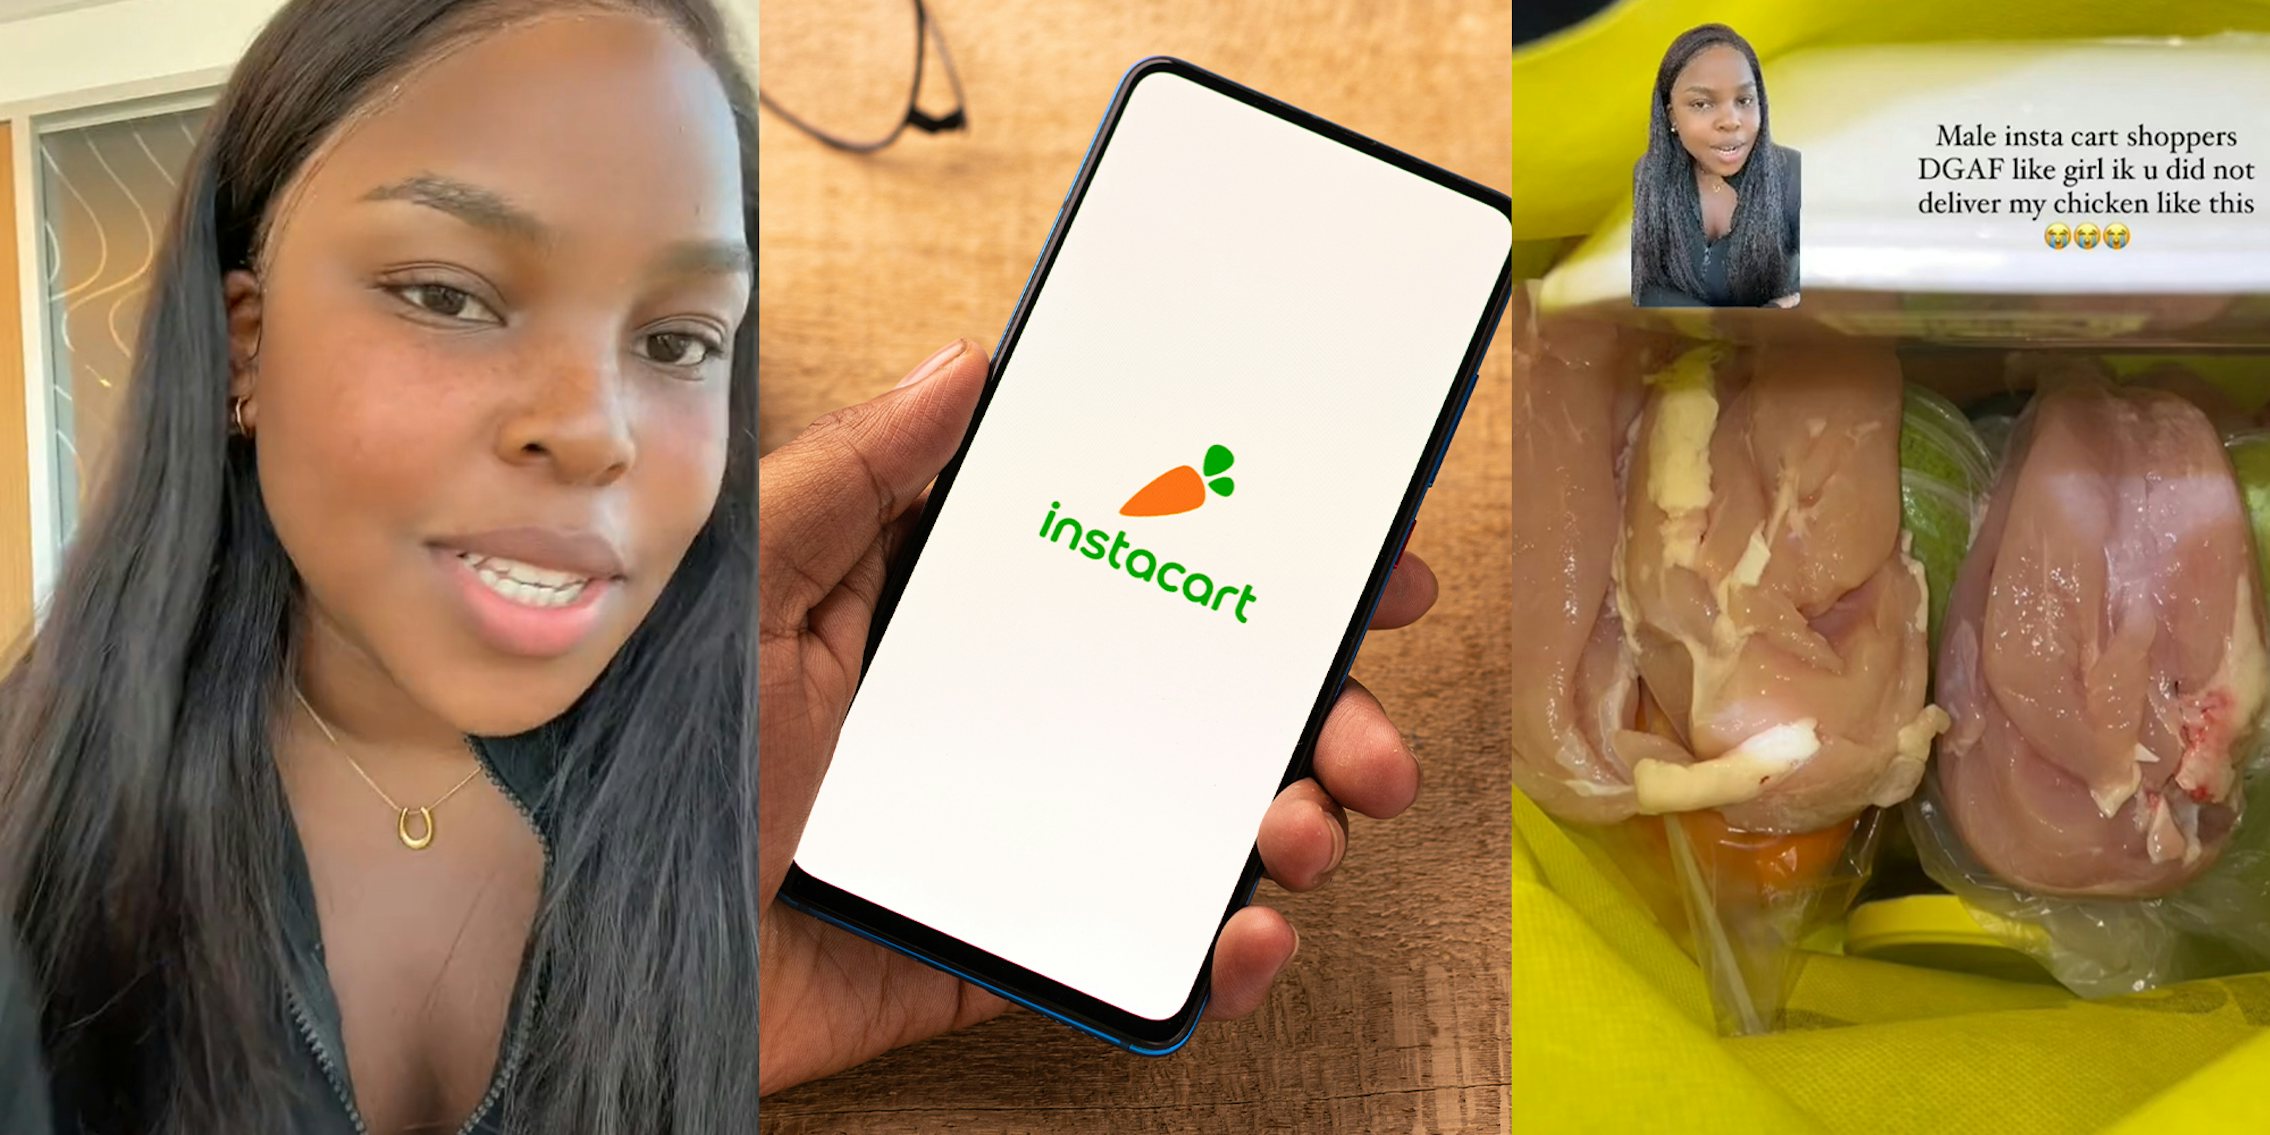 Instacart customer says her male shopper delivered her chicken breast without packaging